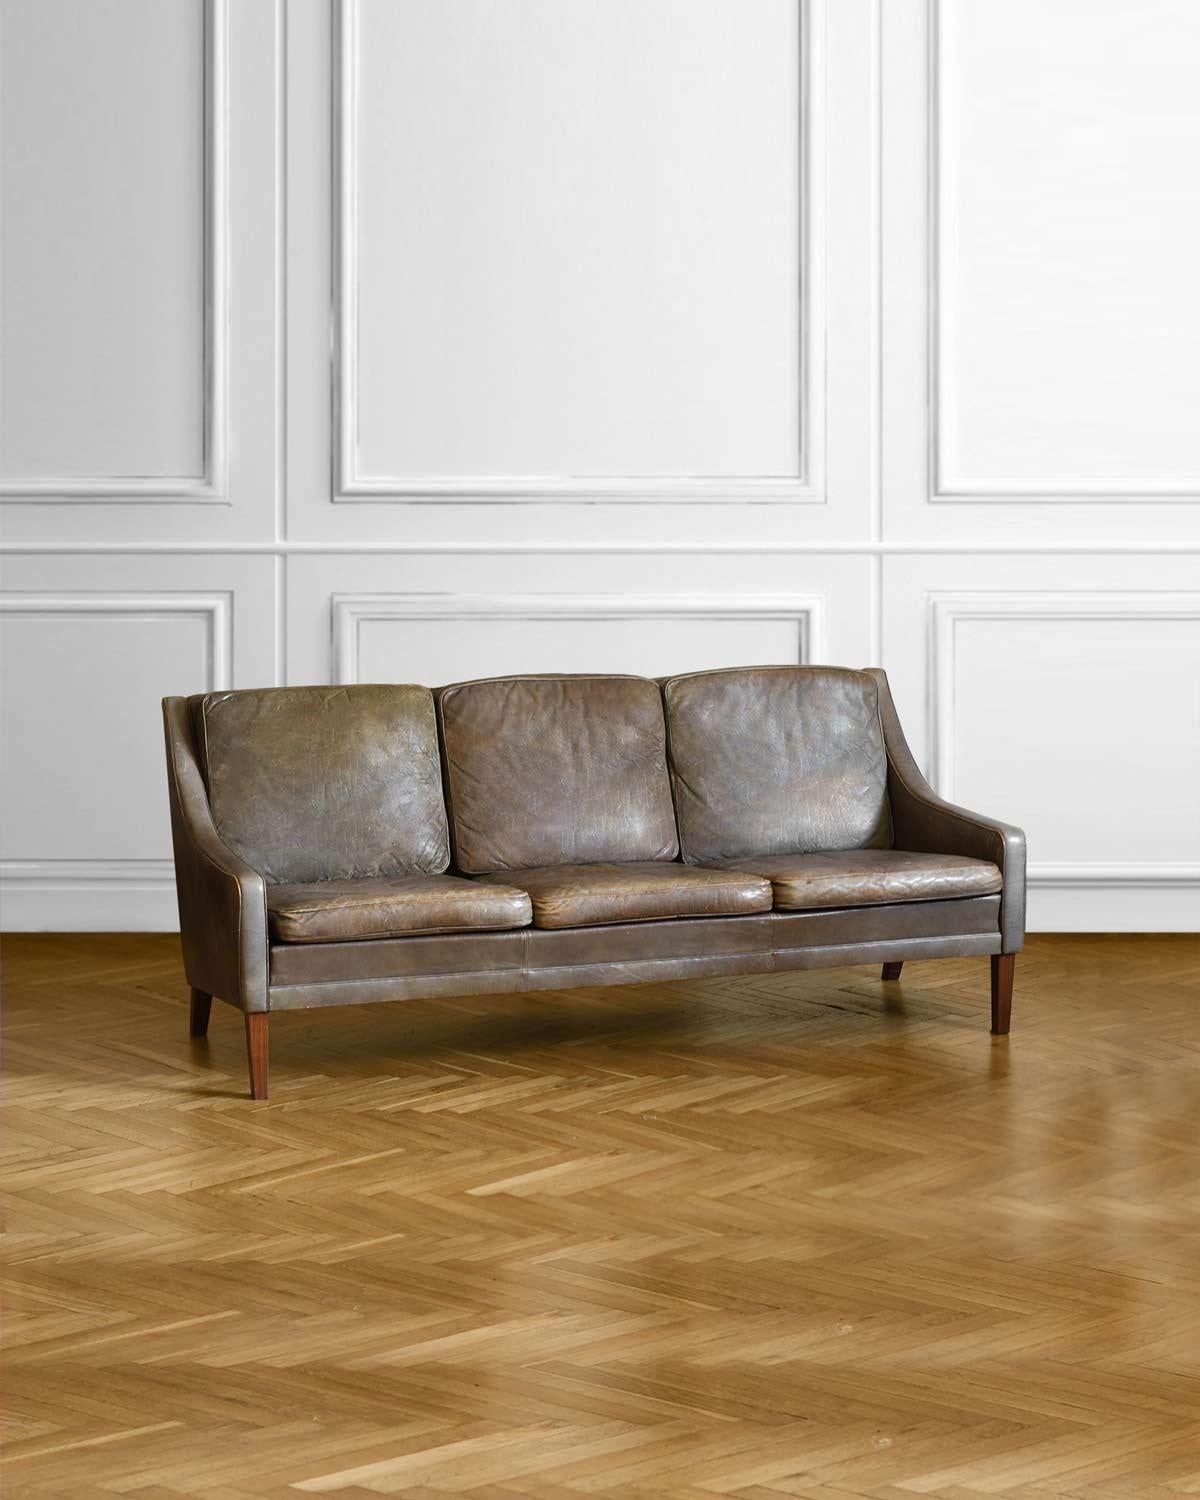 Midcentury leather sofa with wooden feet
Dimensions: 193w x 90h x 80d cm
Materials: leather, wood.
Italian production.